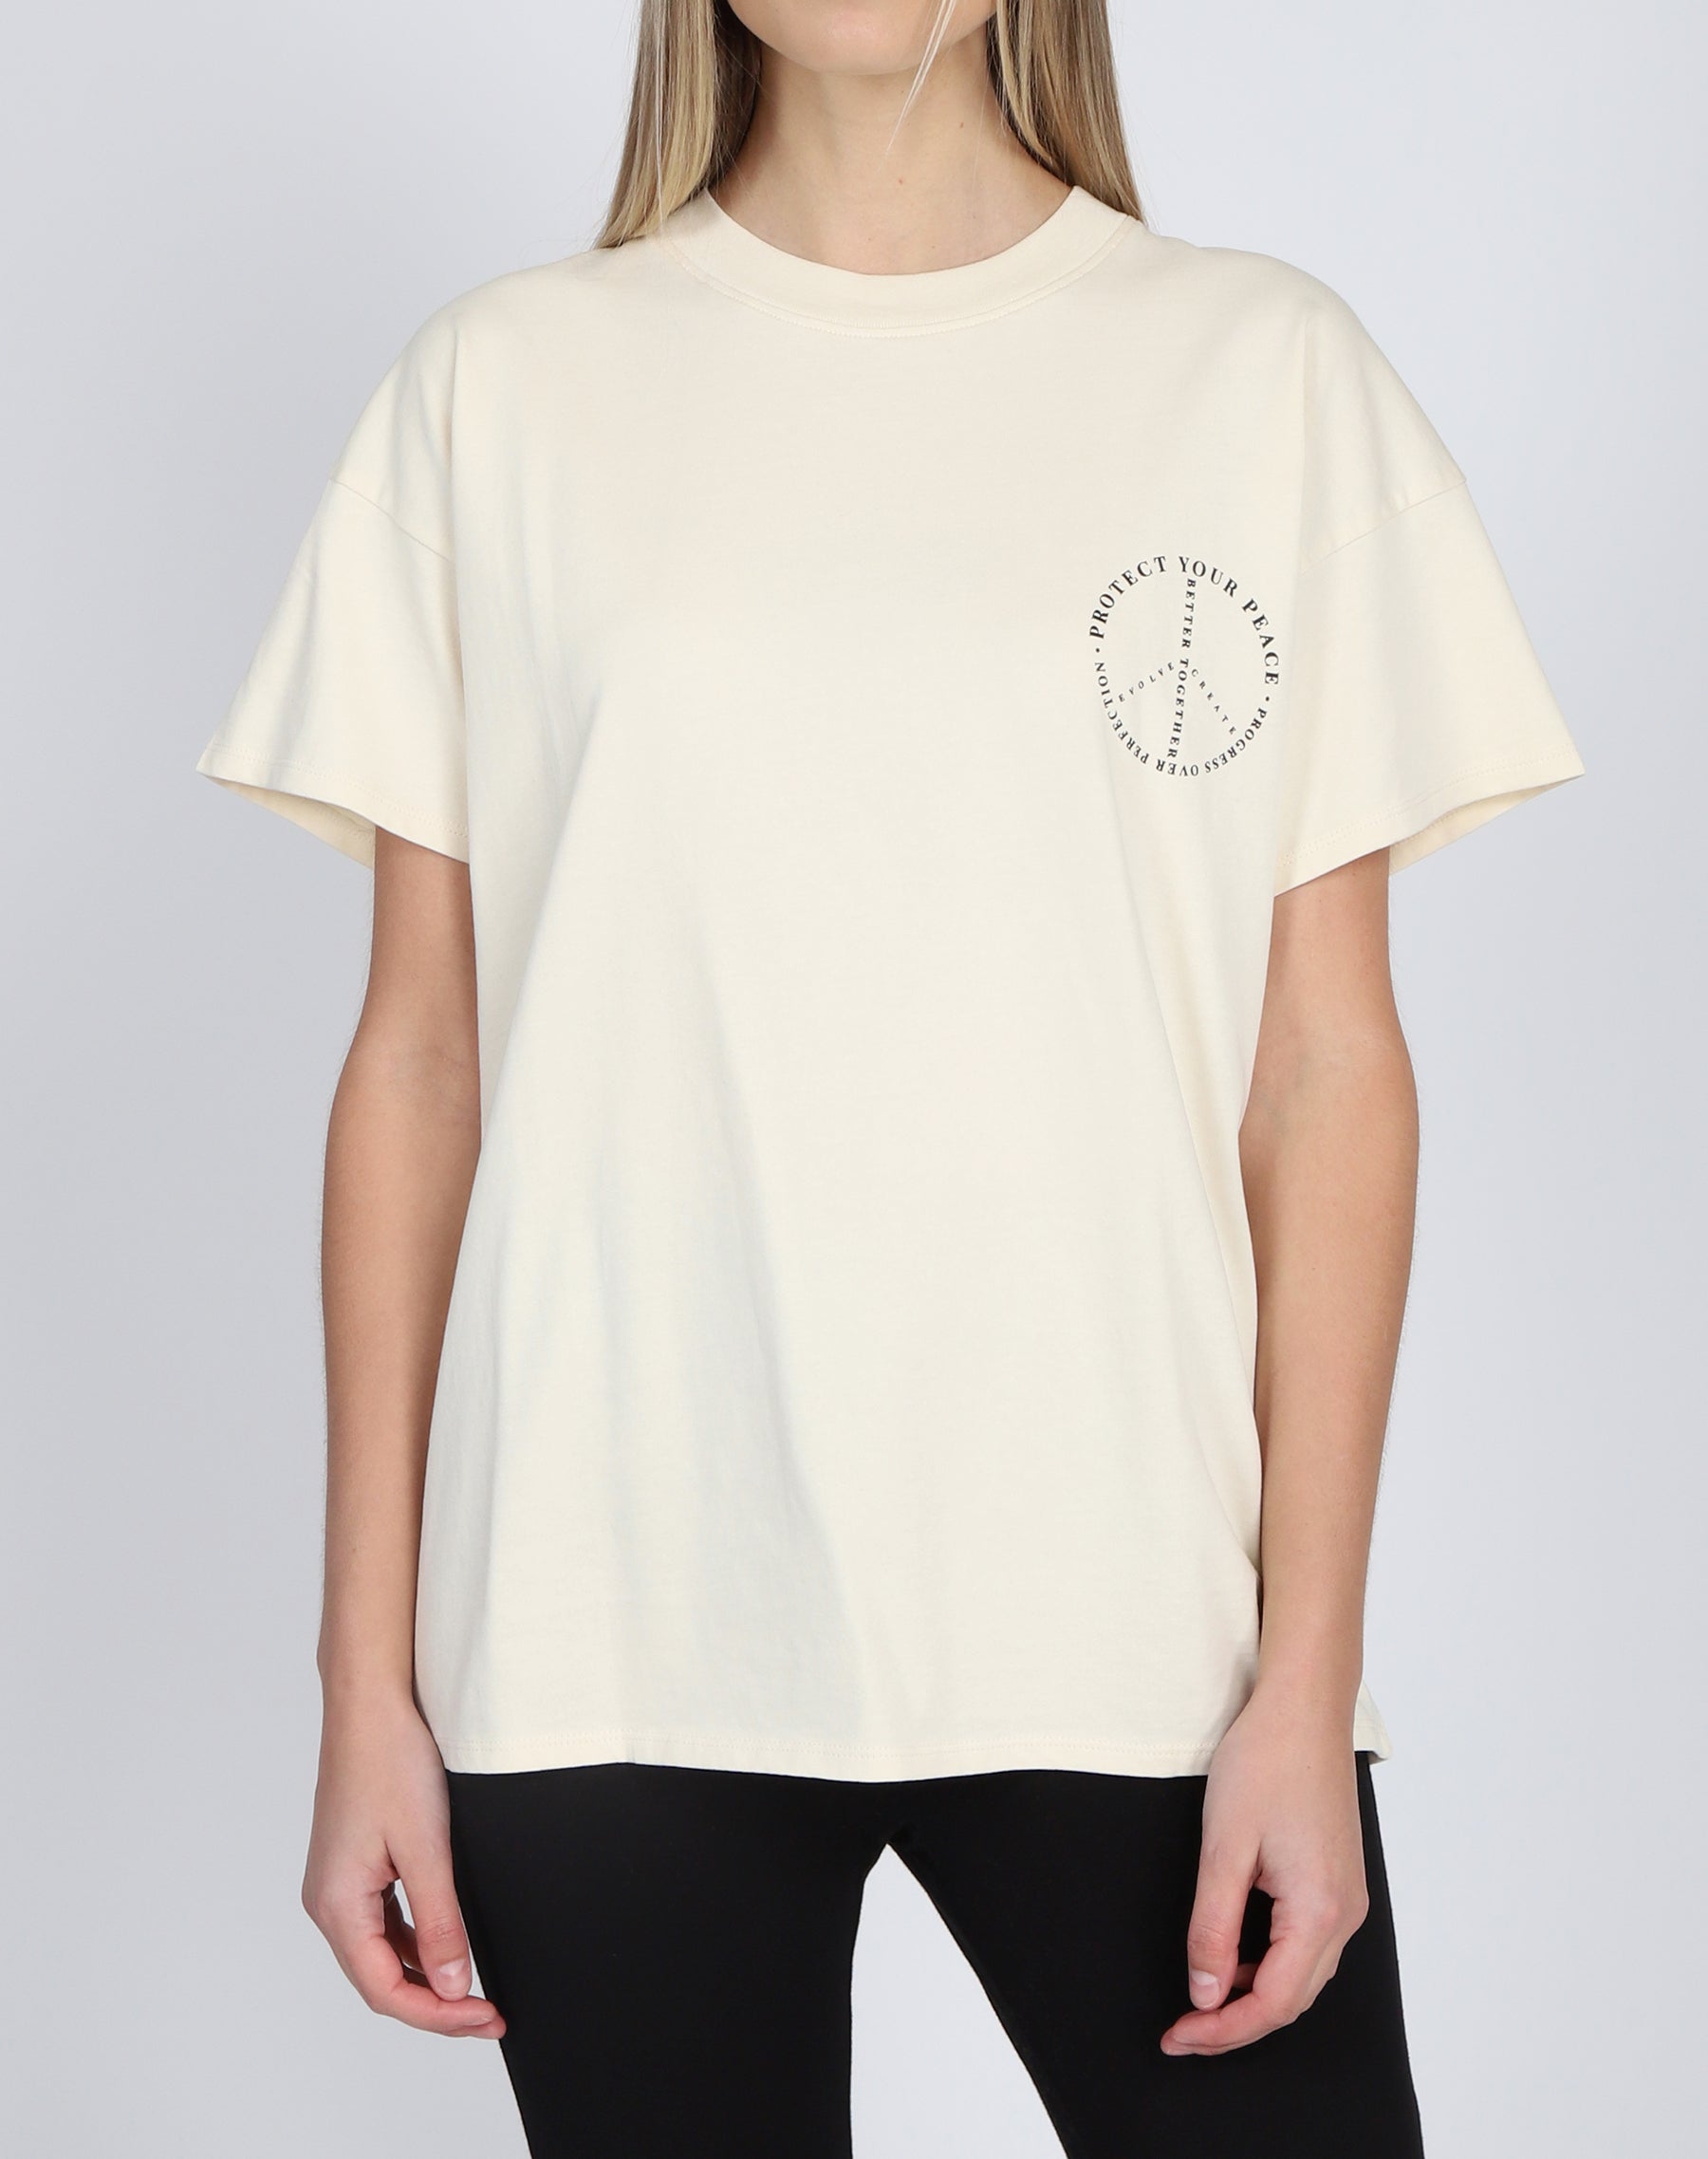 The "PROTECT YOUR PEACE" Oversized Boxy Crew Neck Tee | Almond Milk